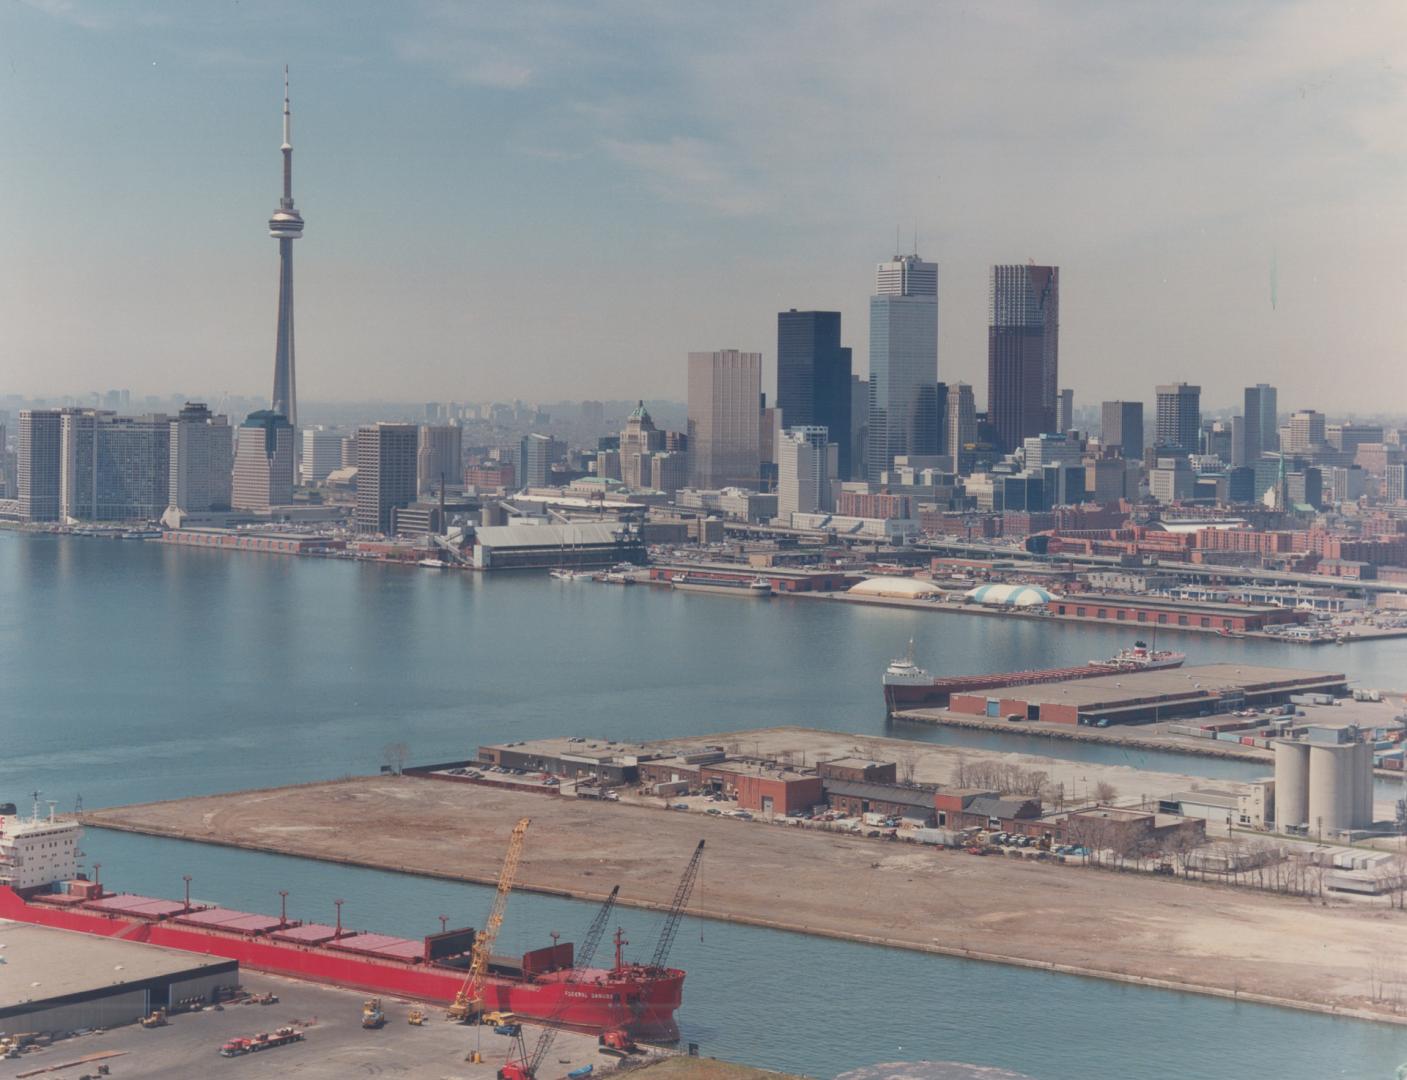 Image shows the Harbour with the CN Tower on the left.